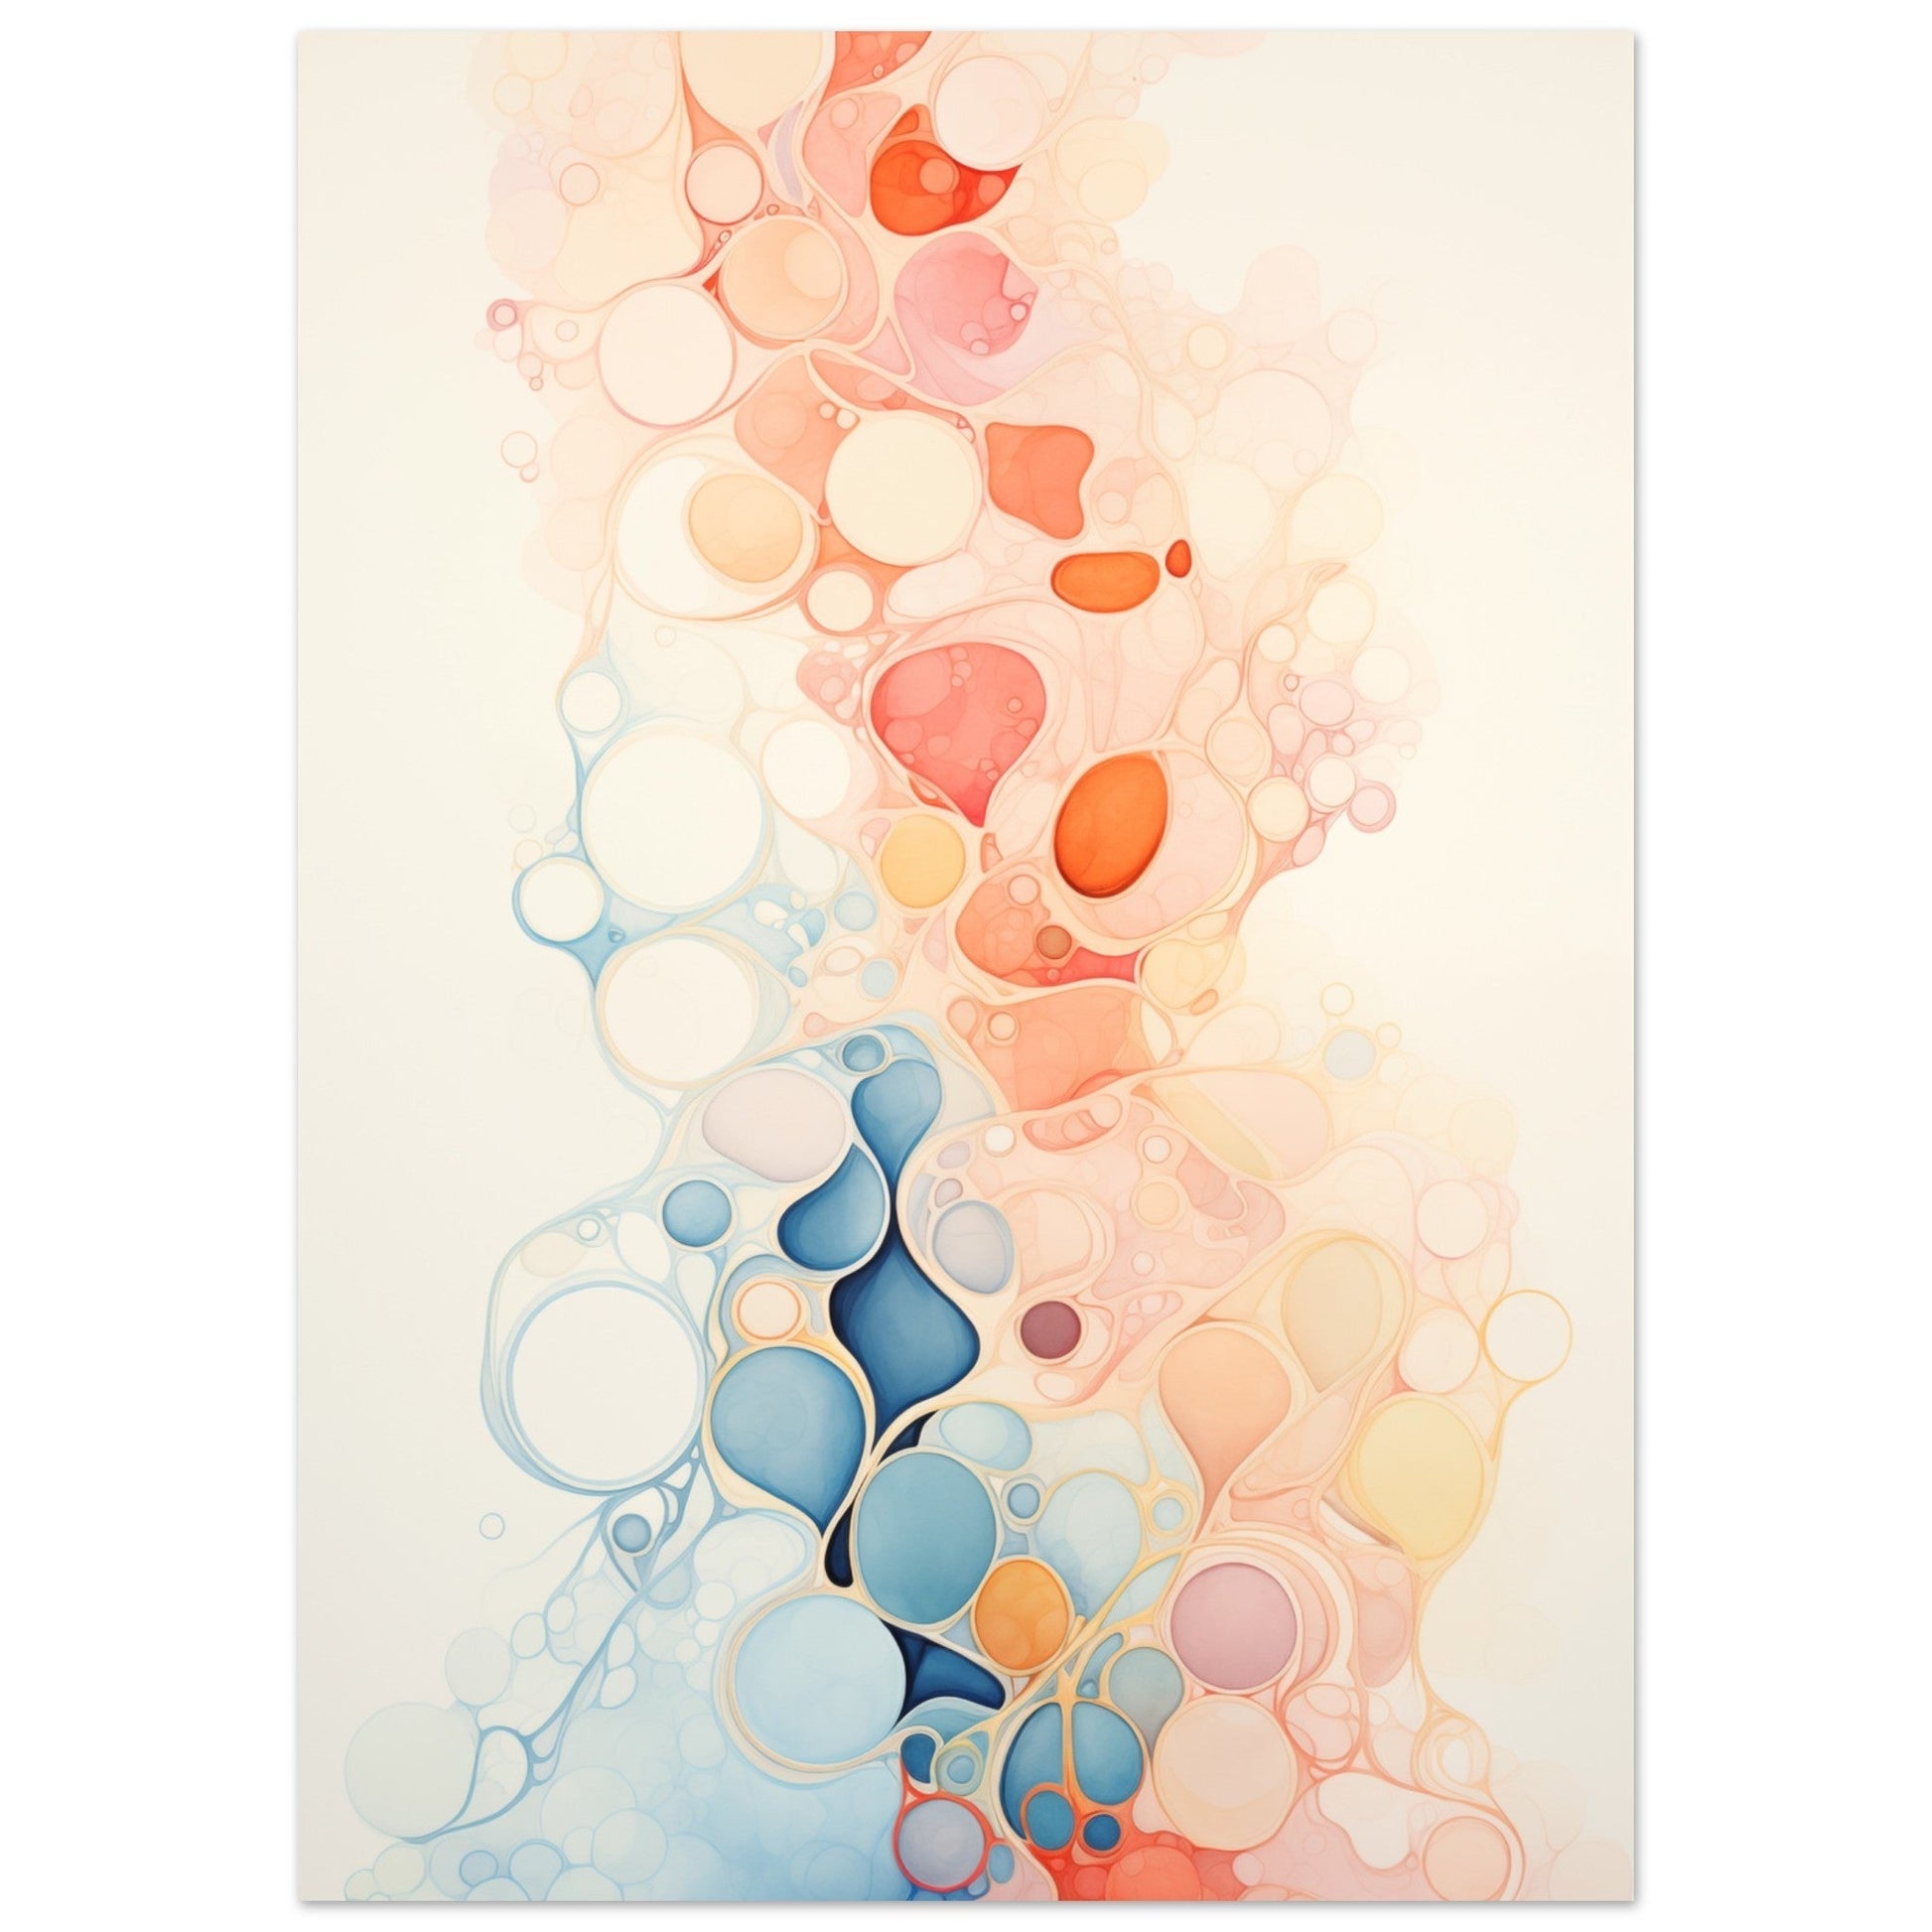 A watercolor painting of Ephemeral Forms on a white background, perfect as wall art to decorate your room with colorful vibes.